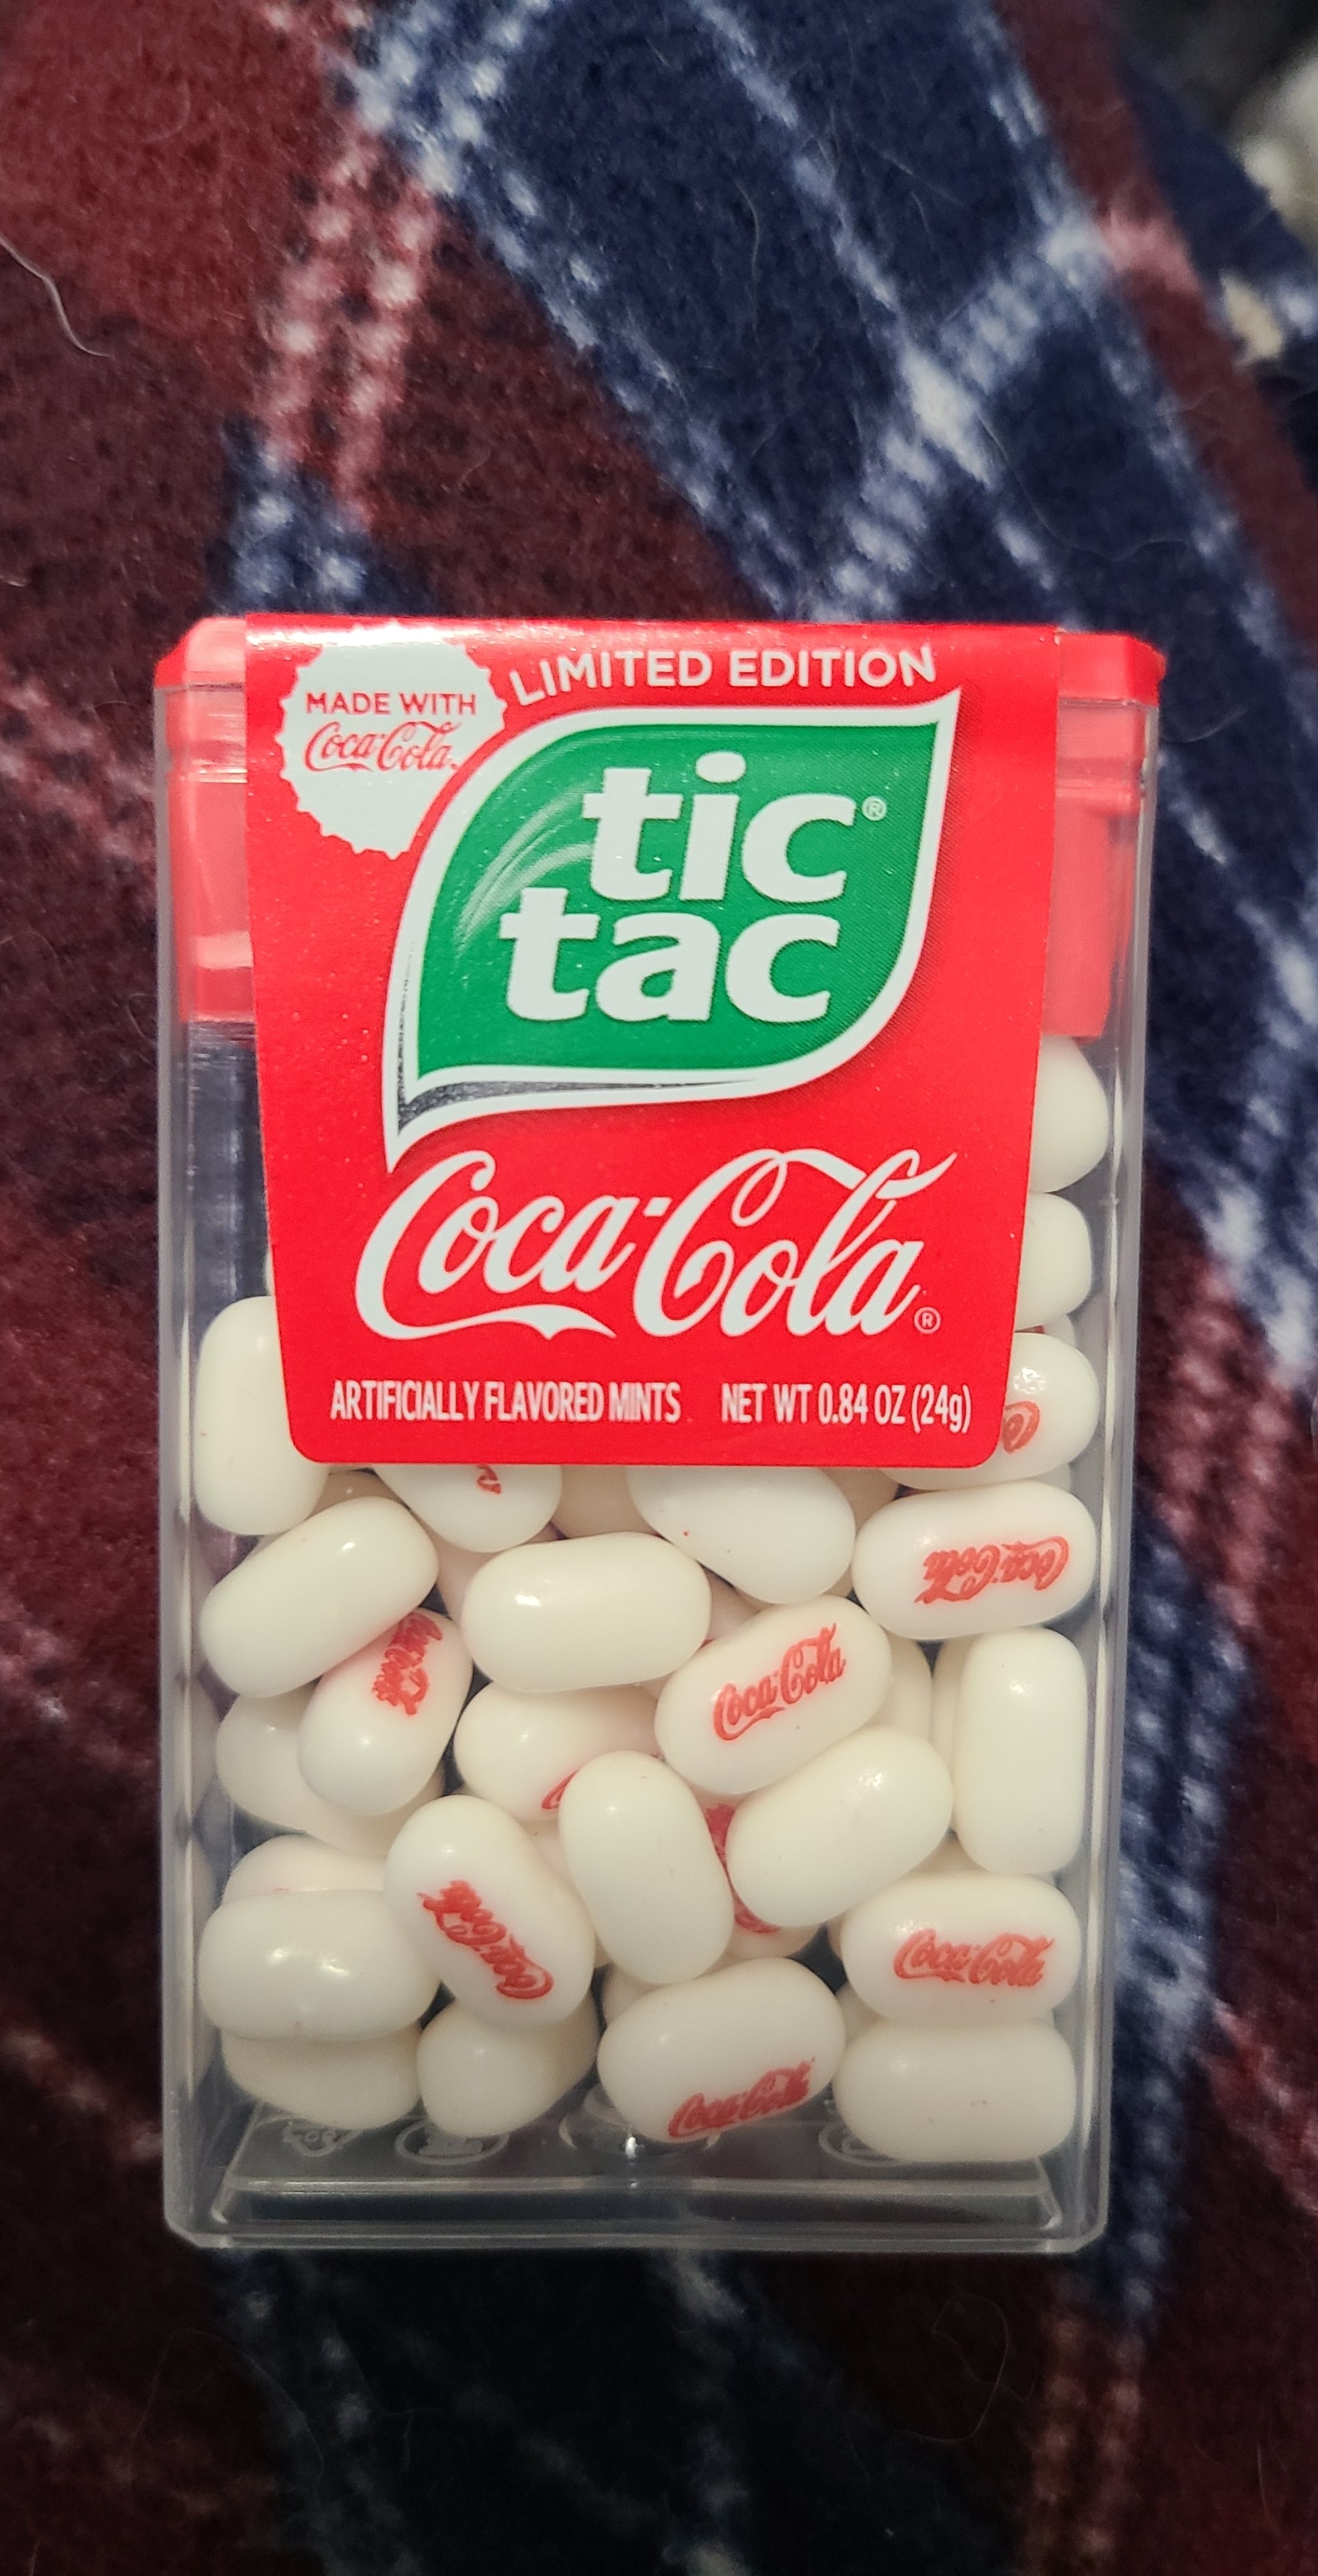 funny random pics and memes - coca cola - Made With CocaCola Limited Edition tic tac CocaCola. Artifically Flavored Mints Net WT084 02 24 CocaCol Build